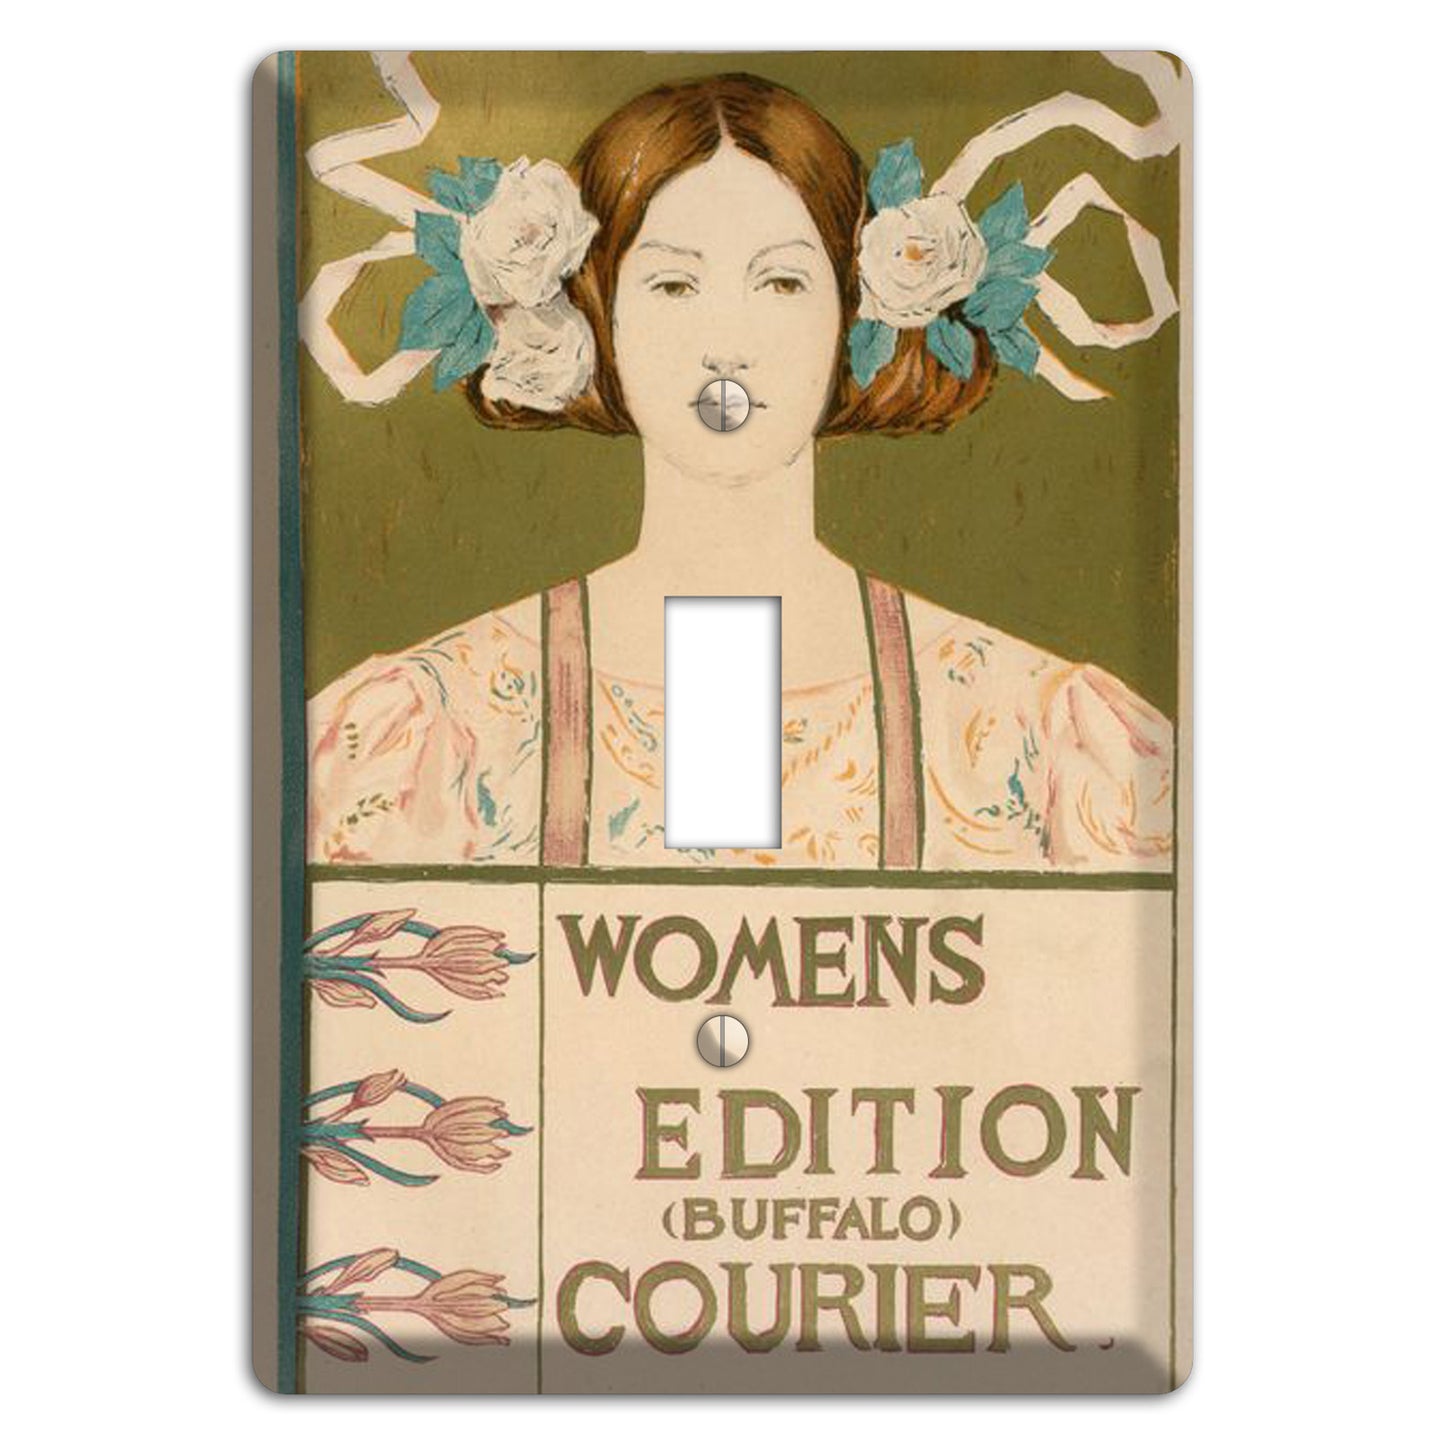 Women's Edition Courier Cover Plates